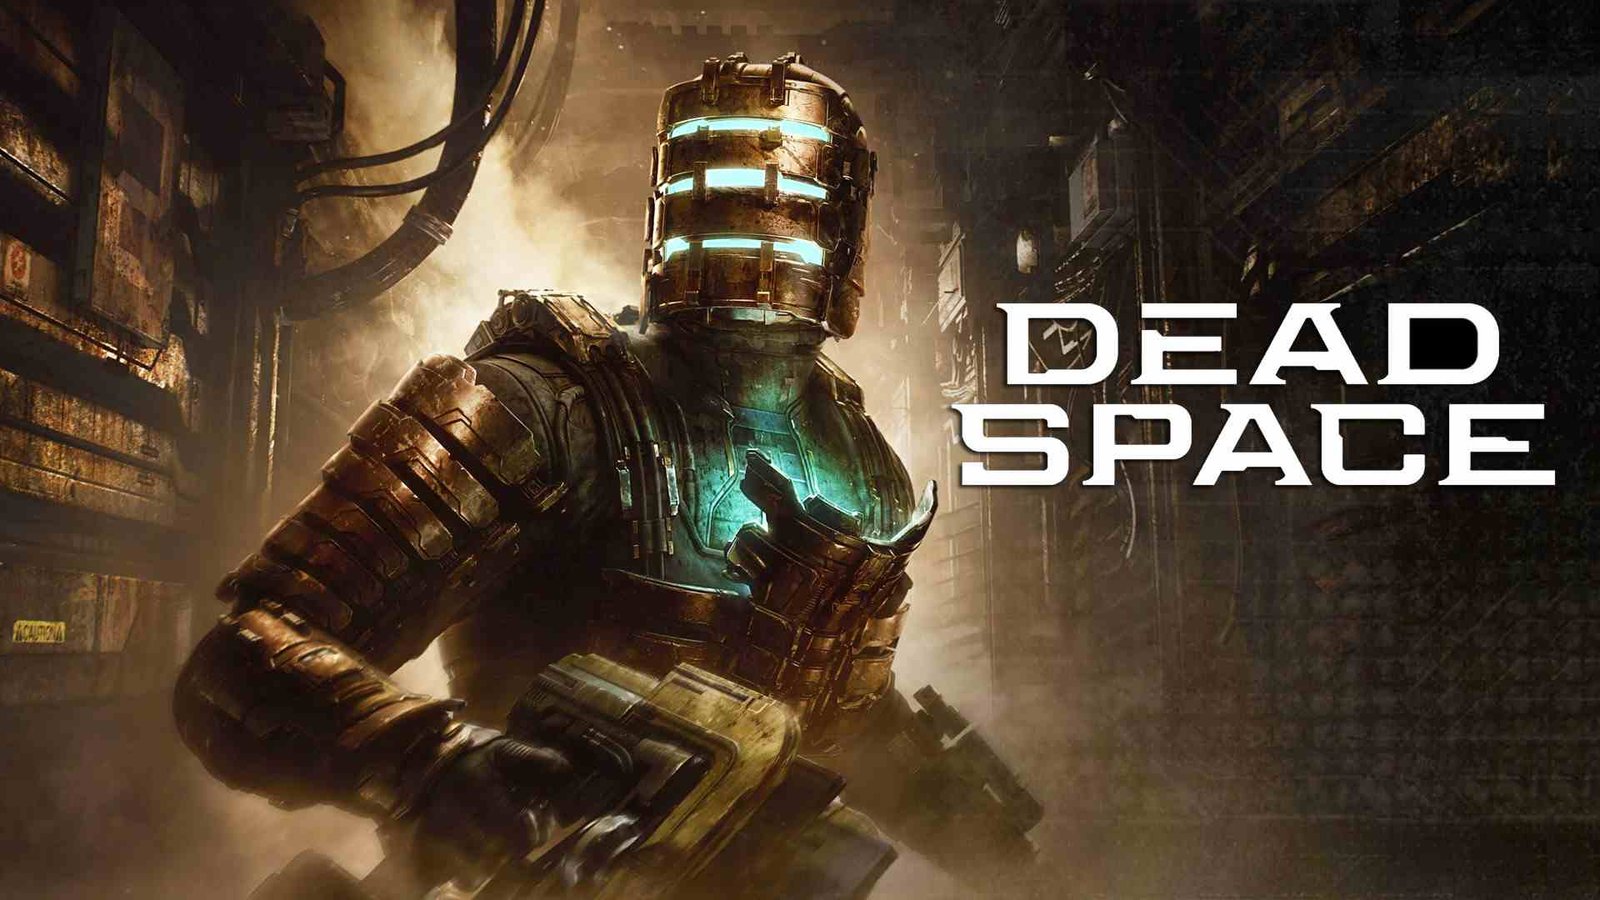 Dead Space Crack PC Game Free Download